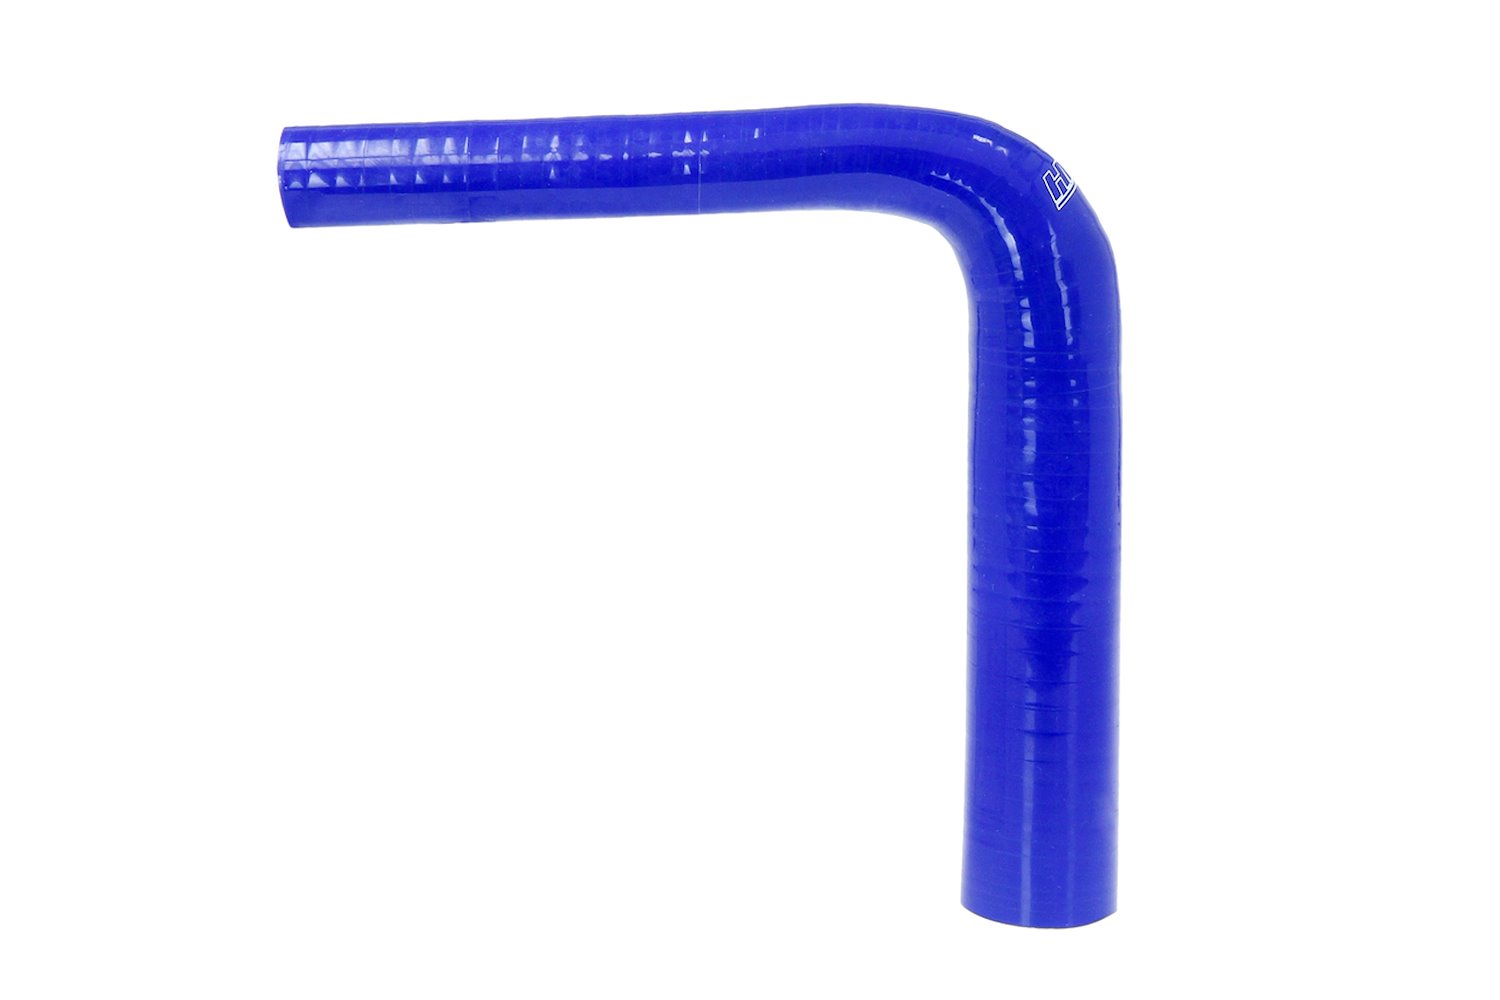 HTSER90-138-175-BLUE Silicone 90-Degree Elbow Hose, High-Temp 4-Ply Reinforced, 1-3/8 in. - 1-3/4 in. ID, Blue